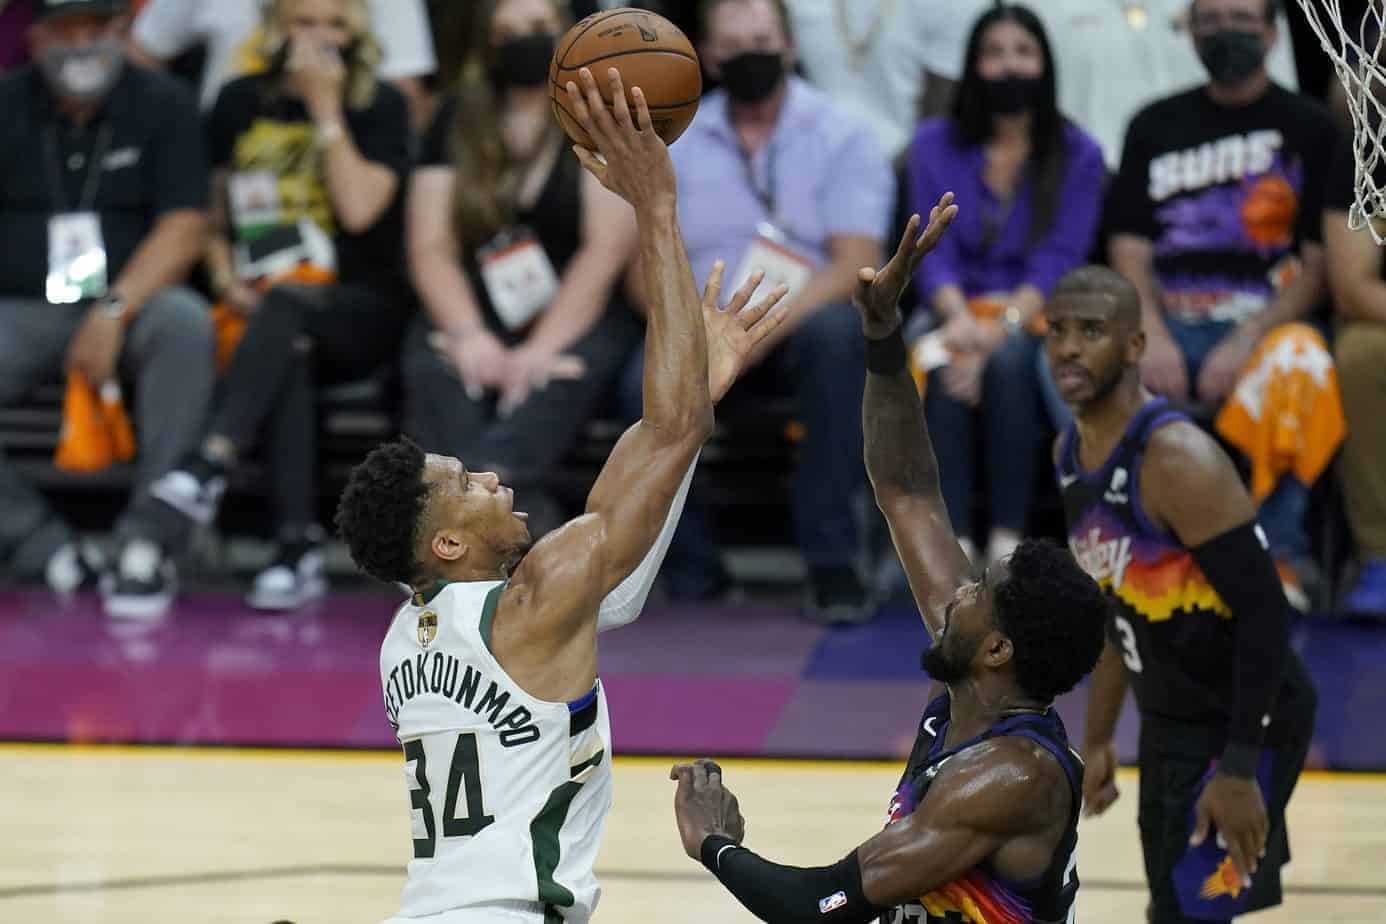 NBA fantasy DFS daily basketball optimal lineup optimizer picks projections starting lineups injury report today tonight free expert ownership rankings Giannis Bucks Heat Clippers Warriors NBA best bets player props odds lines predictions parlays